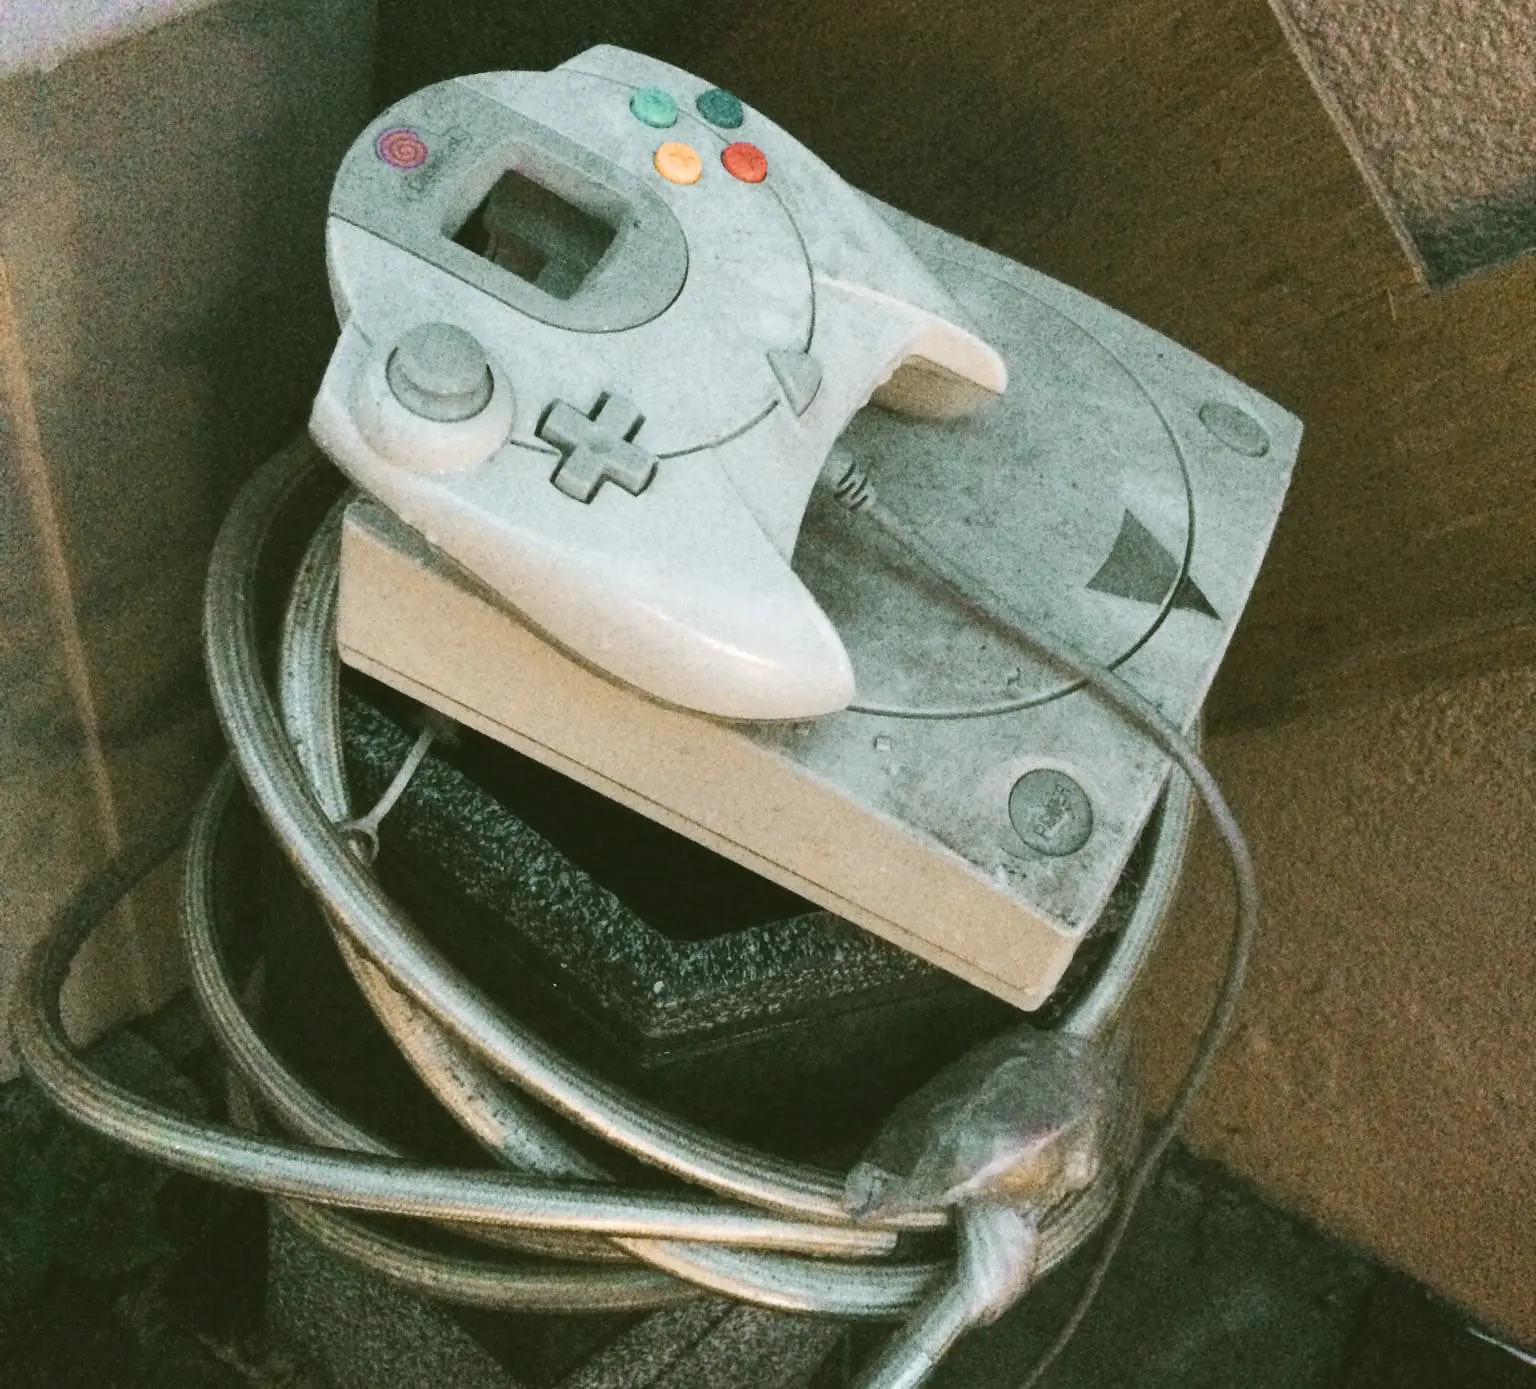 DreamCast is DEAD 02